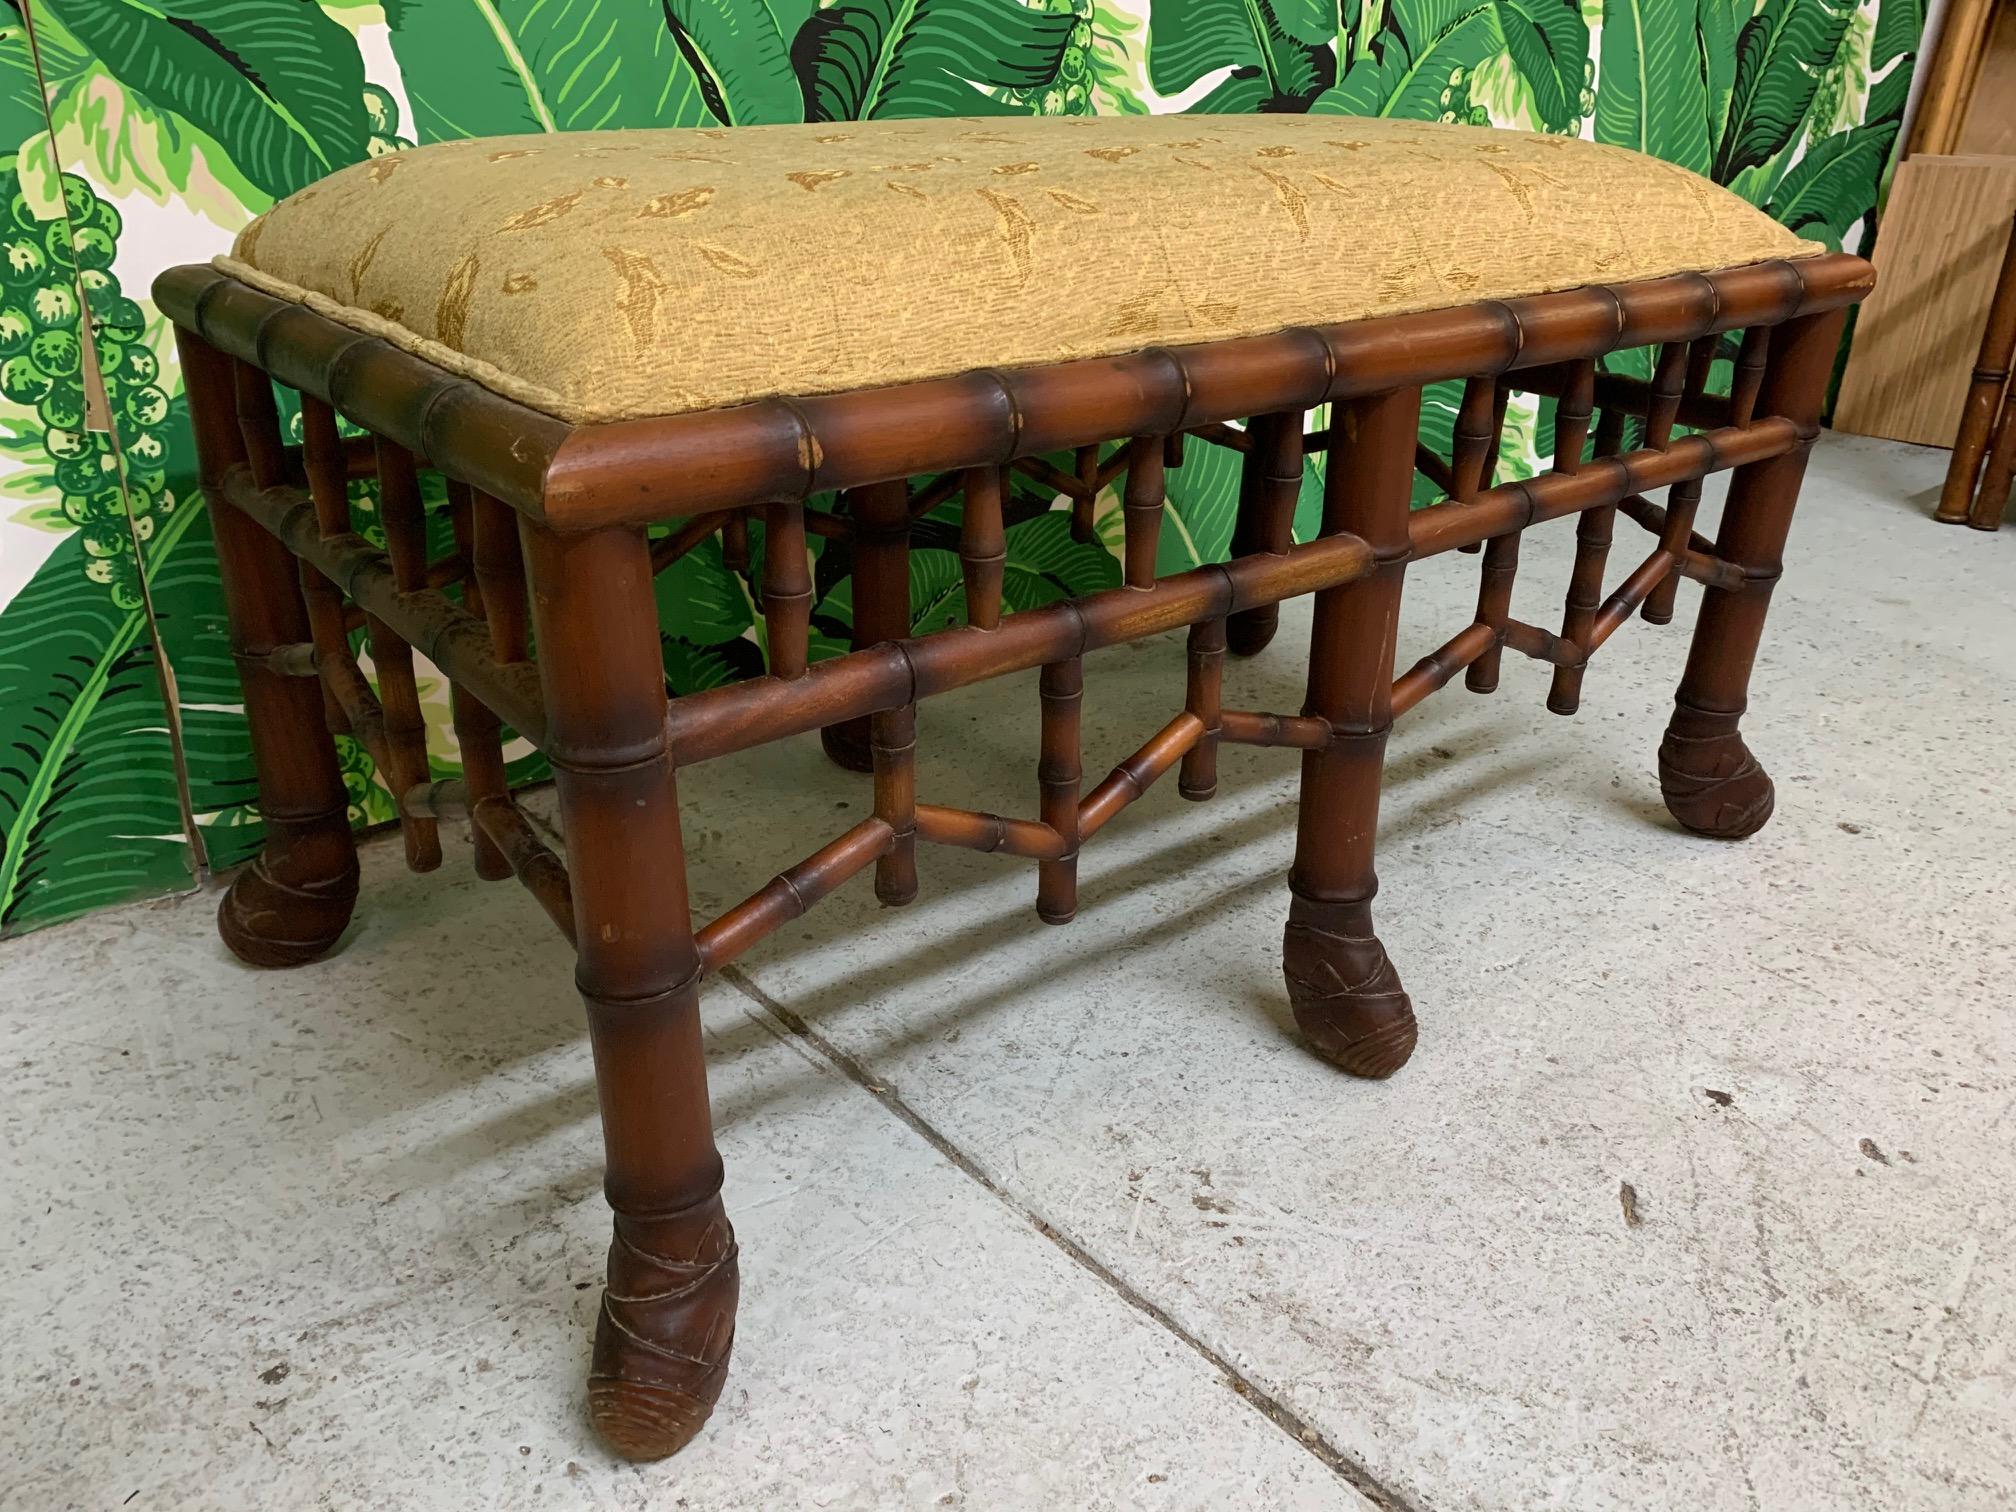 Faux bamboo bench upholstered in gold fabric in the style of Brighton Pavilion seating. Good condition with only minor imperfections consistent with age. May exhibit scuffs, marks, or wear, see photos for details.
For a shipping quote to your exact